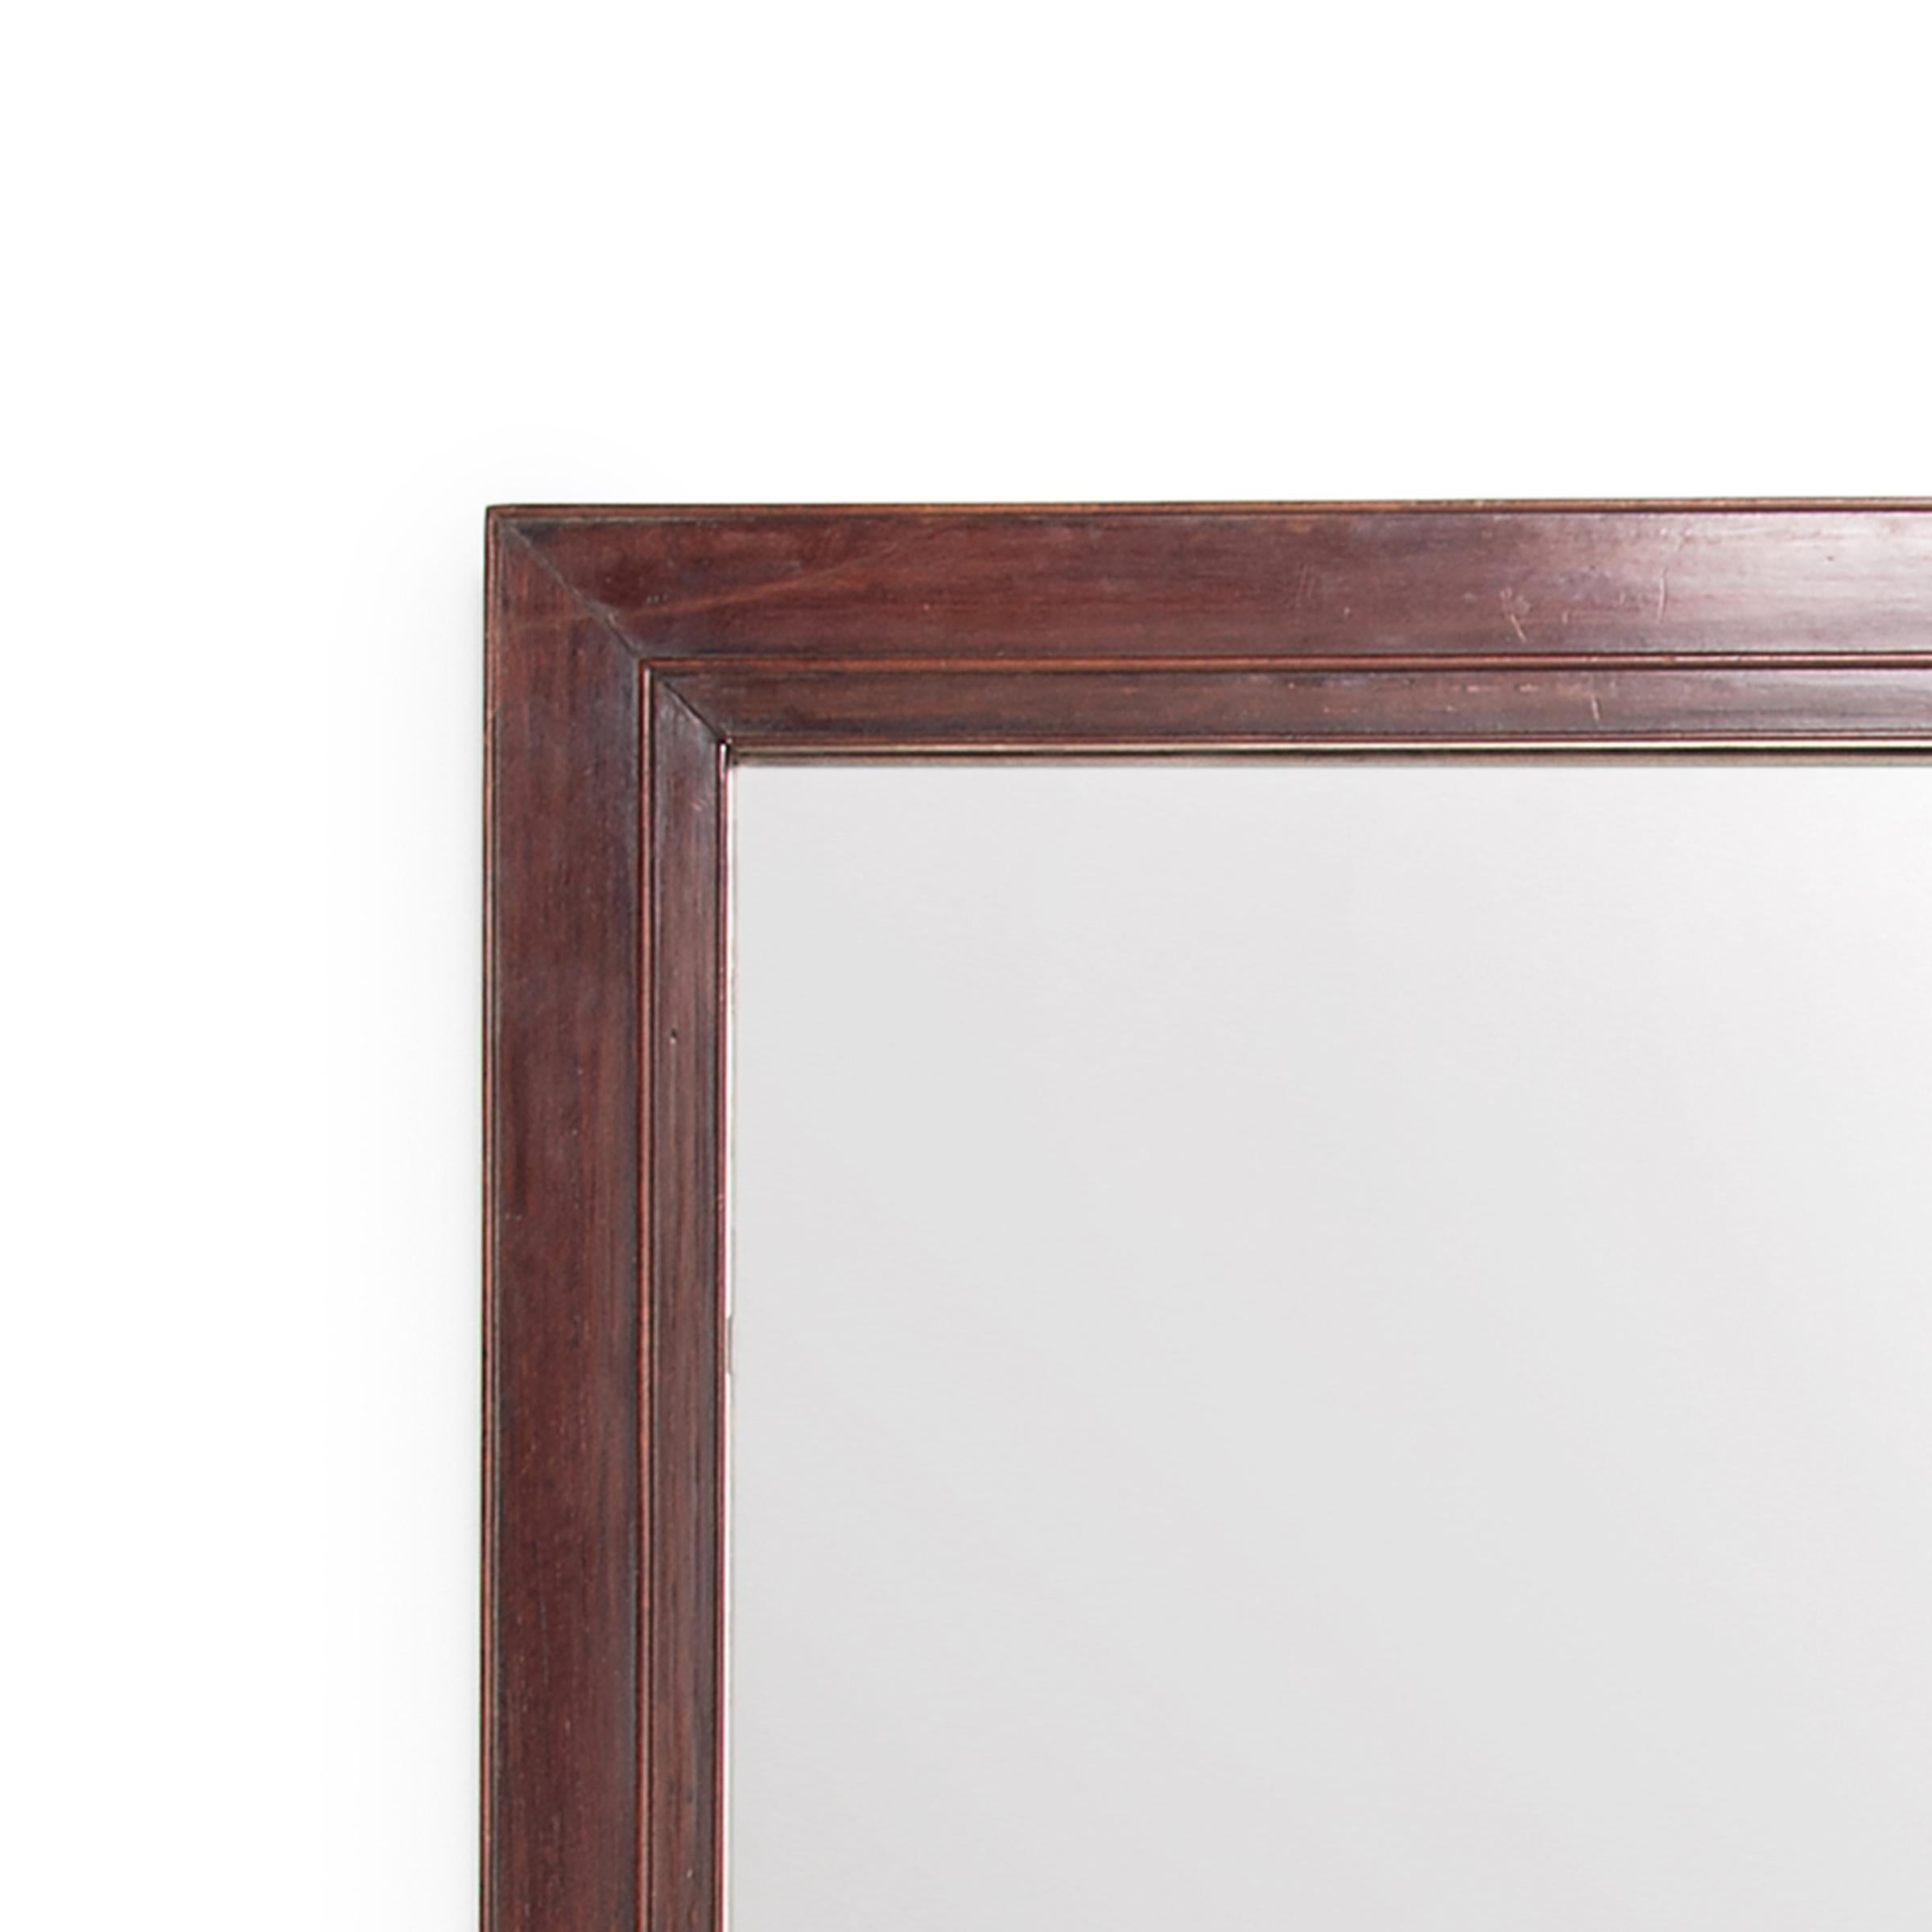 This mid-19th century Chinese scholars' mirror is crafted from a beautiful hardwood, notable for its tight grain and warm coloring. The corners are mitered and the frame is finished all around with three sinuous carved beads. A fresh mirror replaces